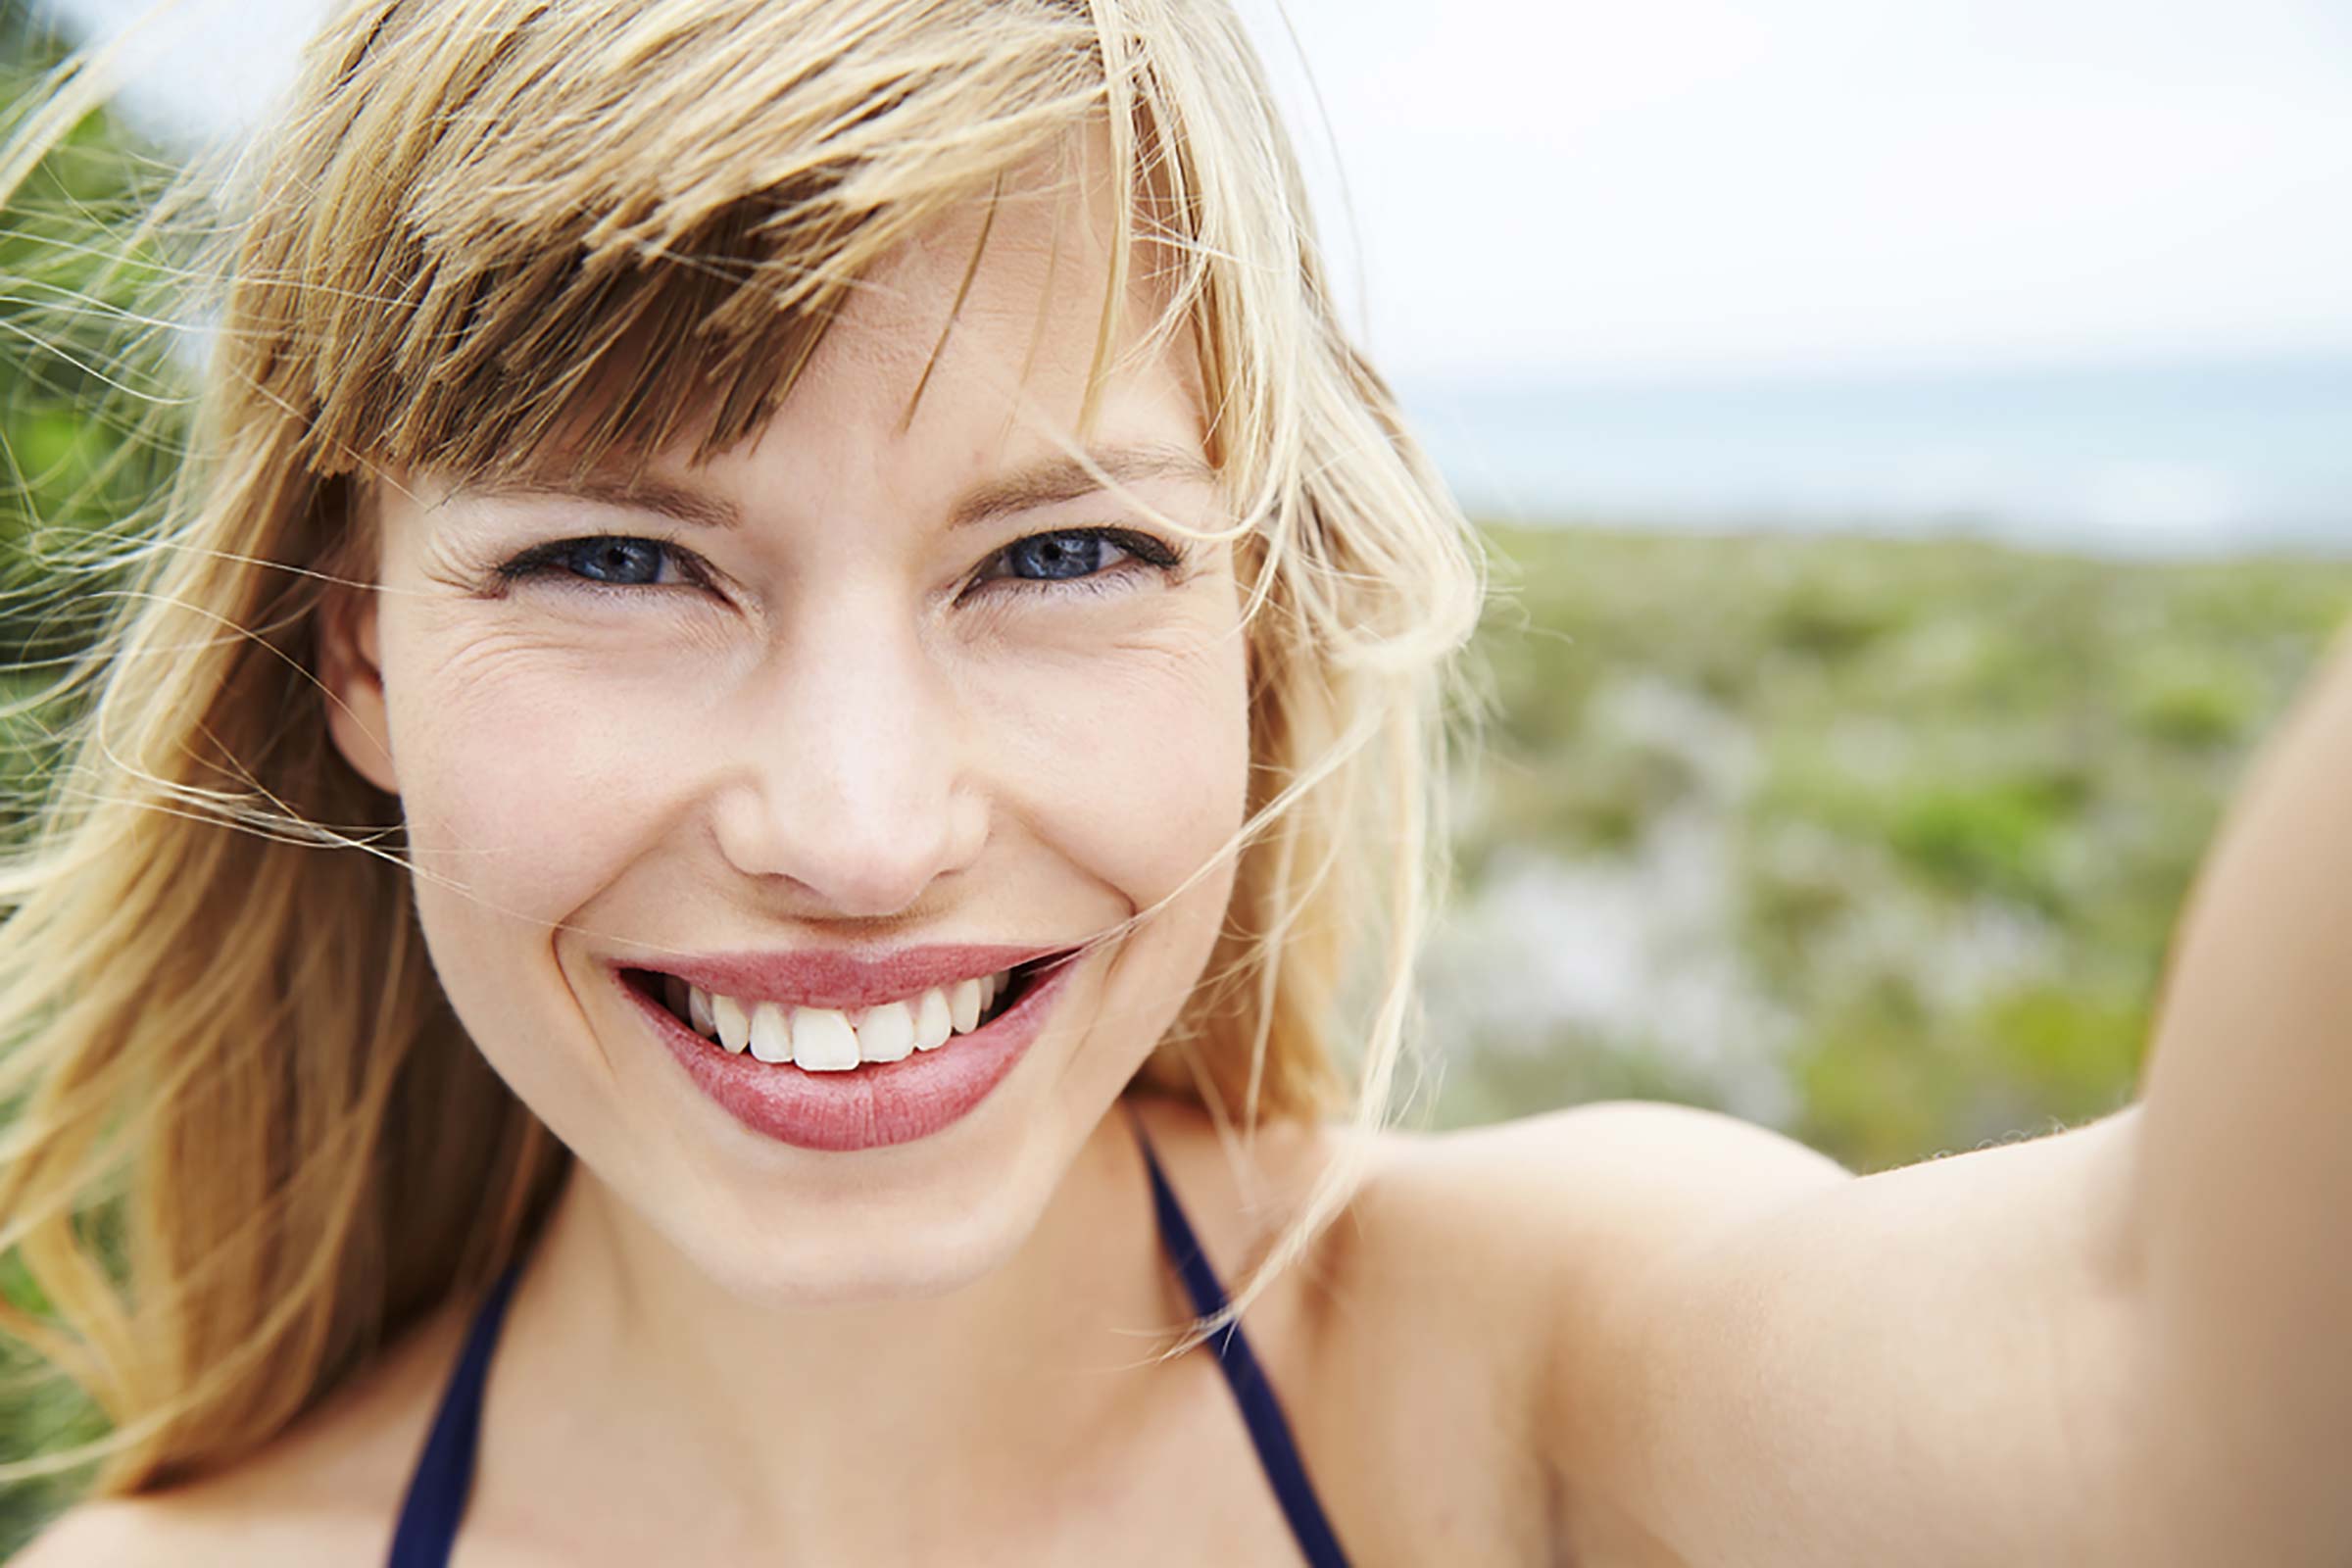 Is Smiling Contagious? Find Out the Cheery Answer | Reader's Digest